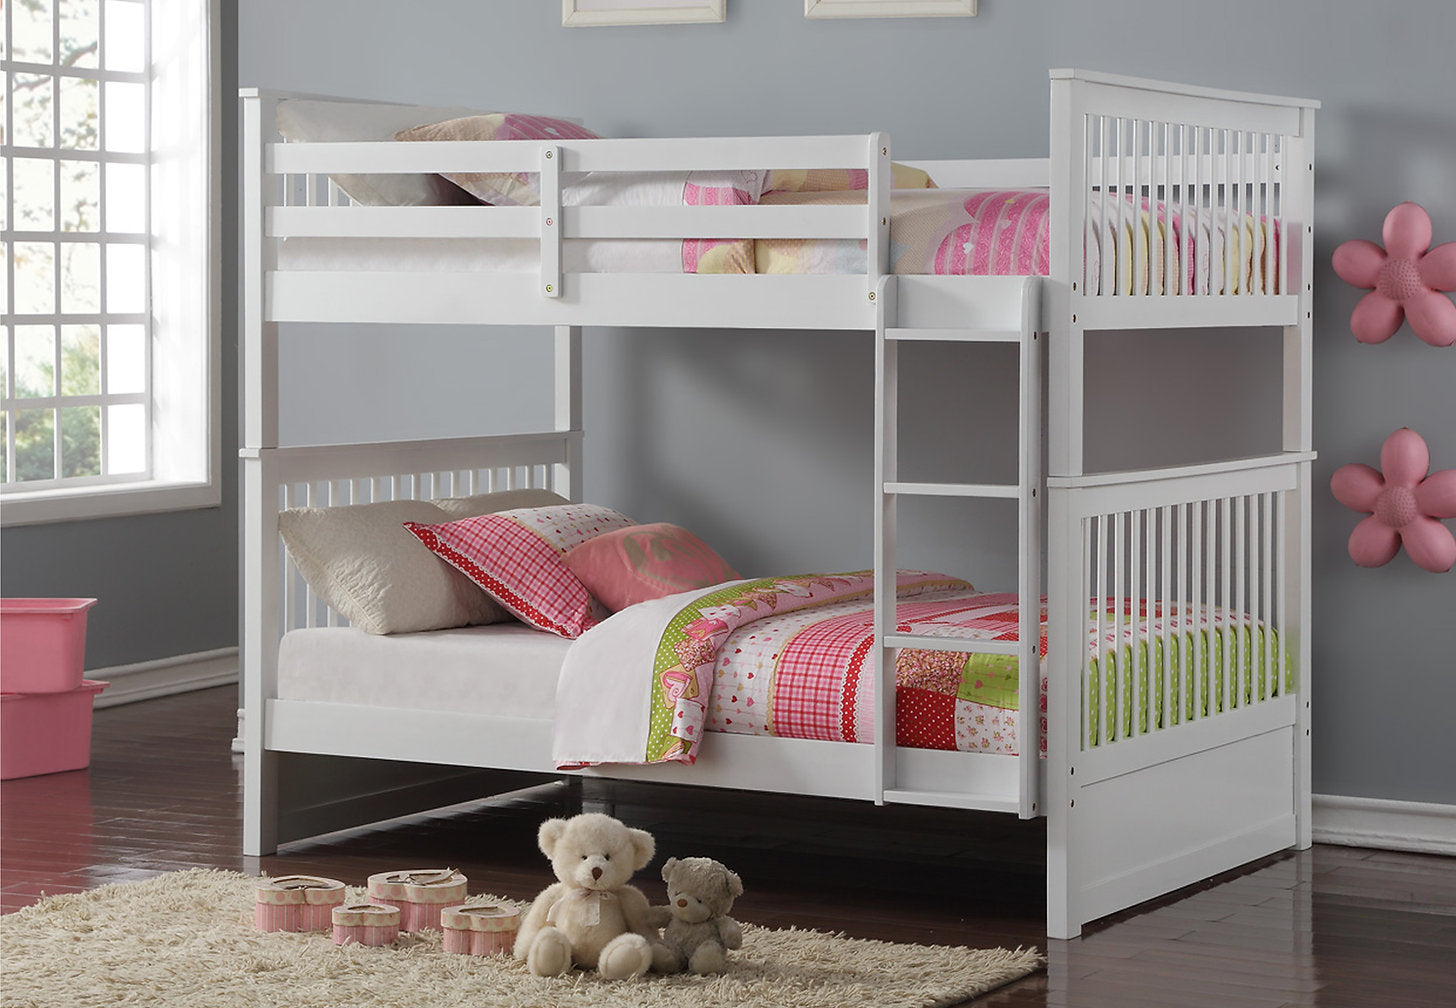 SYDNEY - TWIN / TWIN BUNK BED FRAME - WHITE